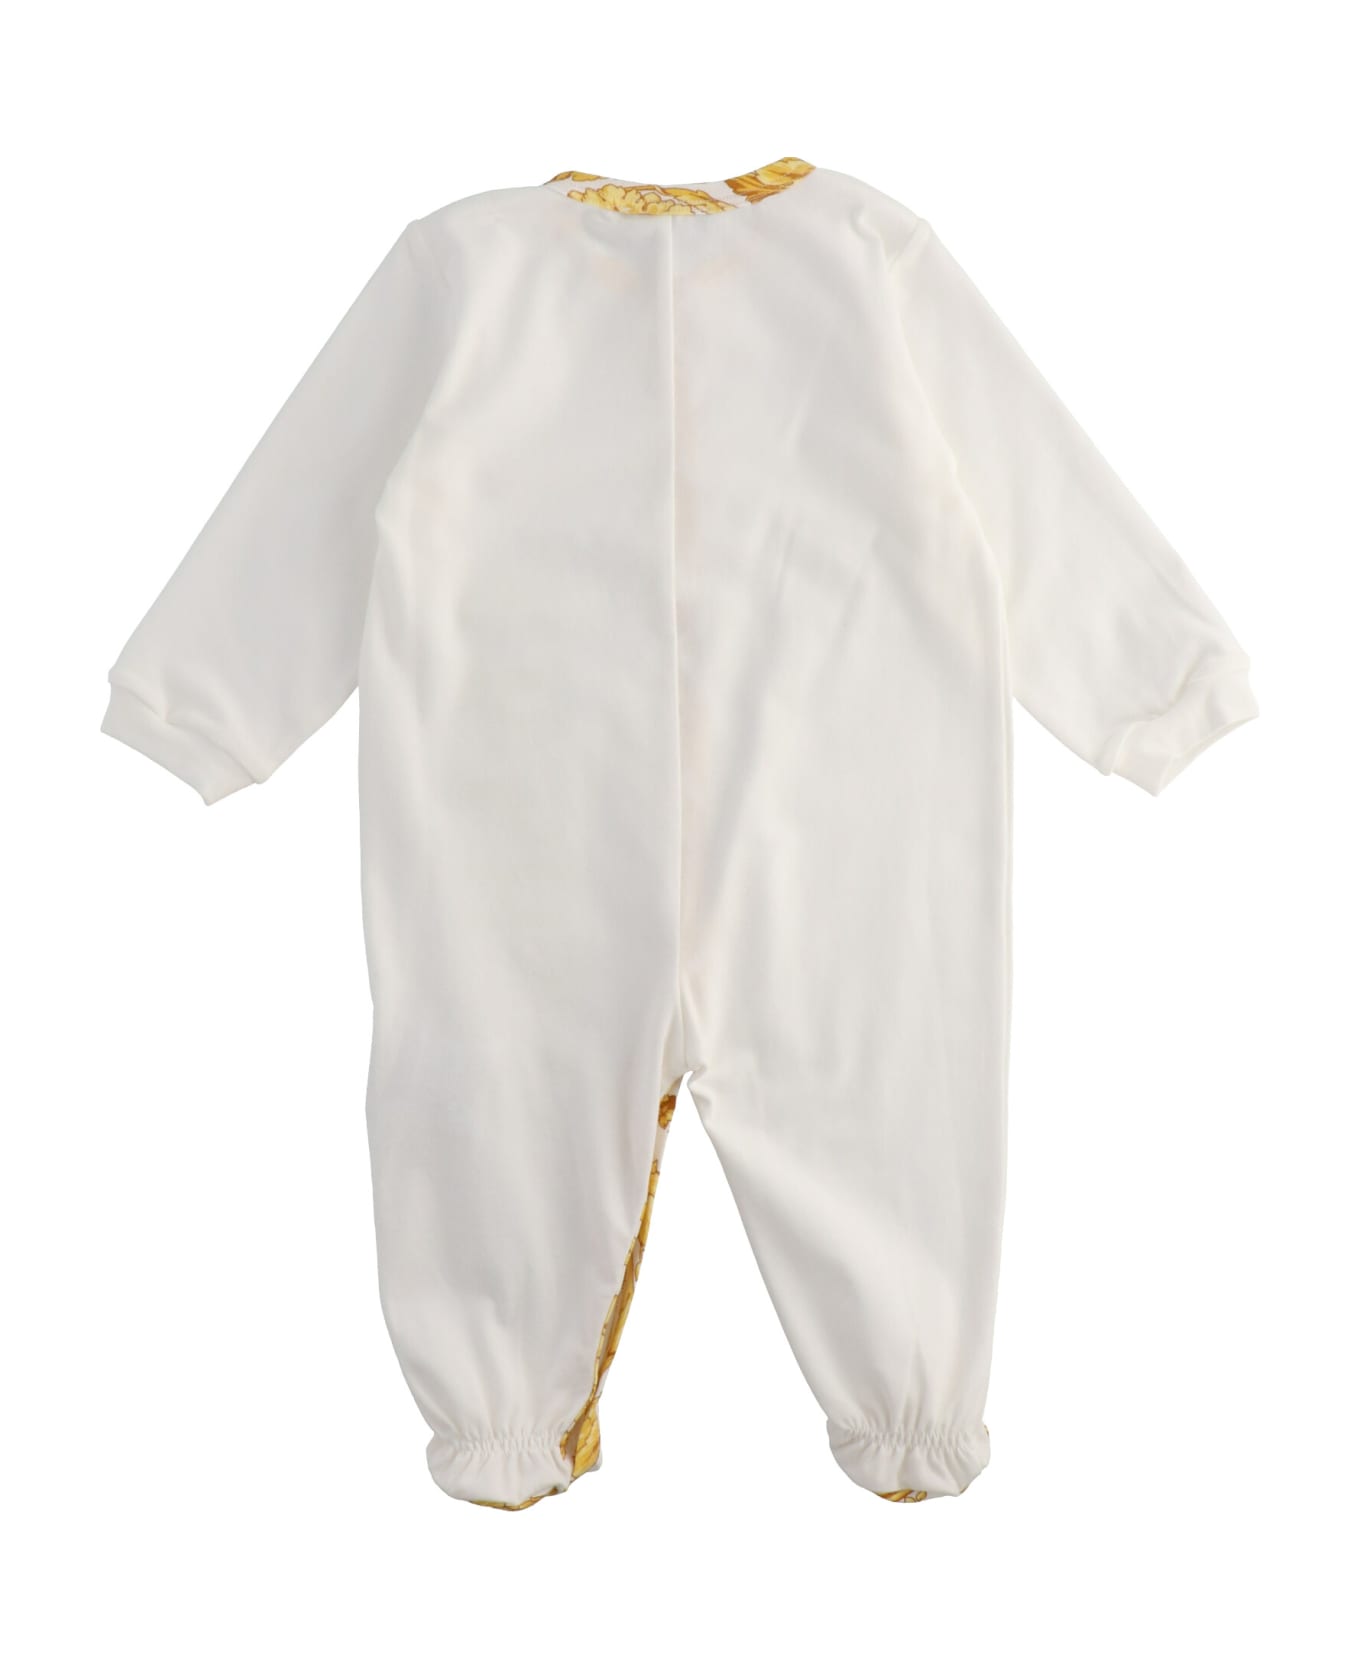 Versace 'barocco' Rompersuit - White